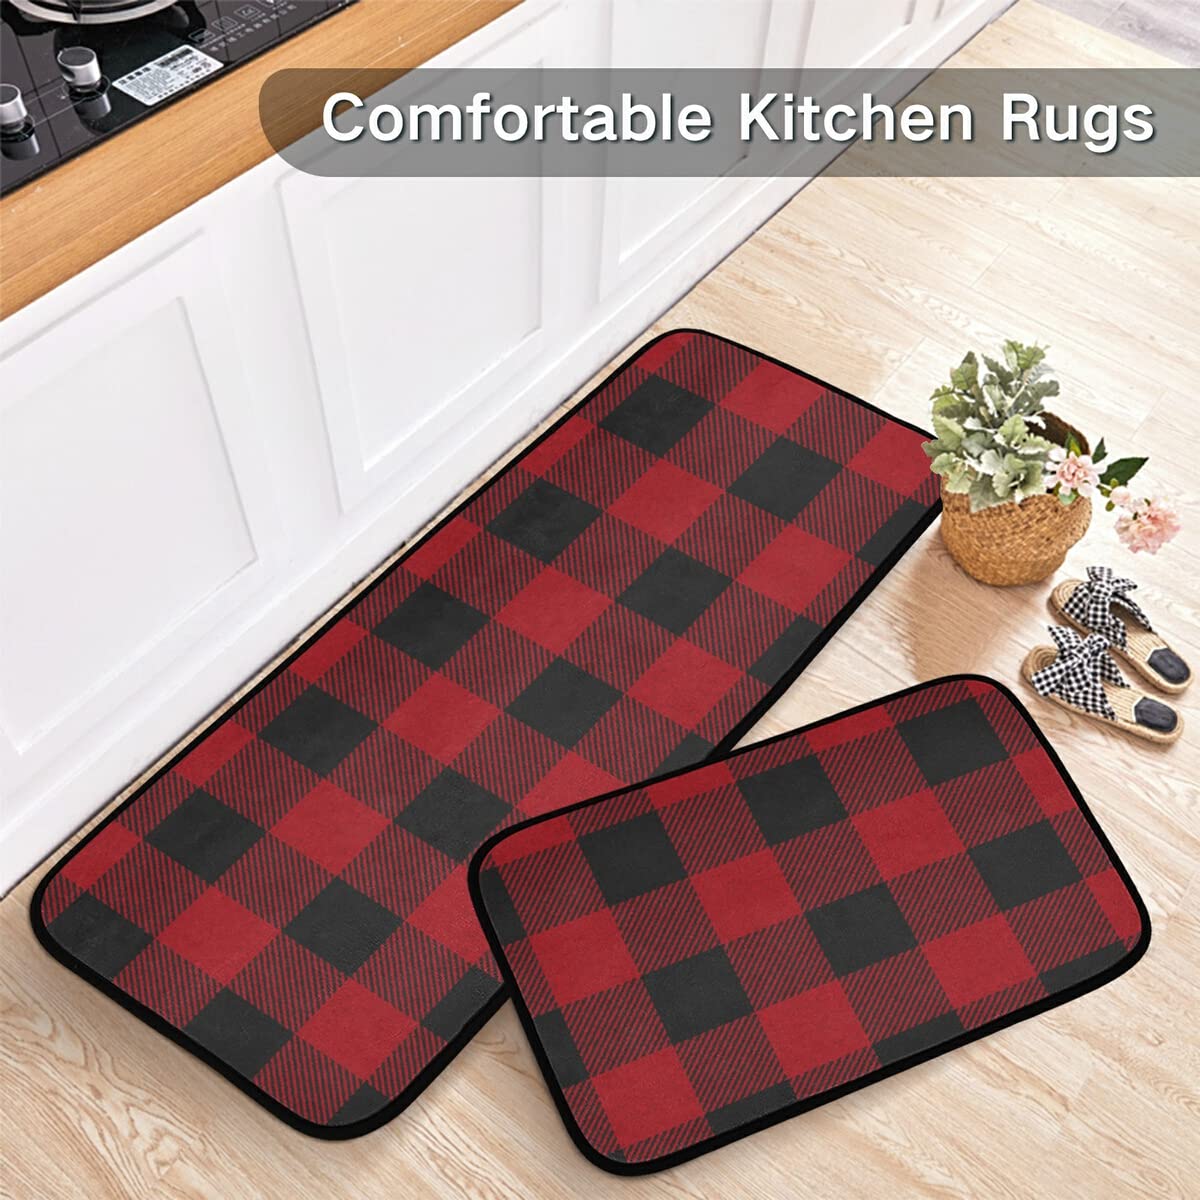 Christmas Kitchen Rugs and Mats,Christmas Kitchen Mat for Kitchen Bathroom Merry Christmas Red Black Buffalo Plaid